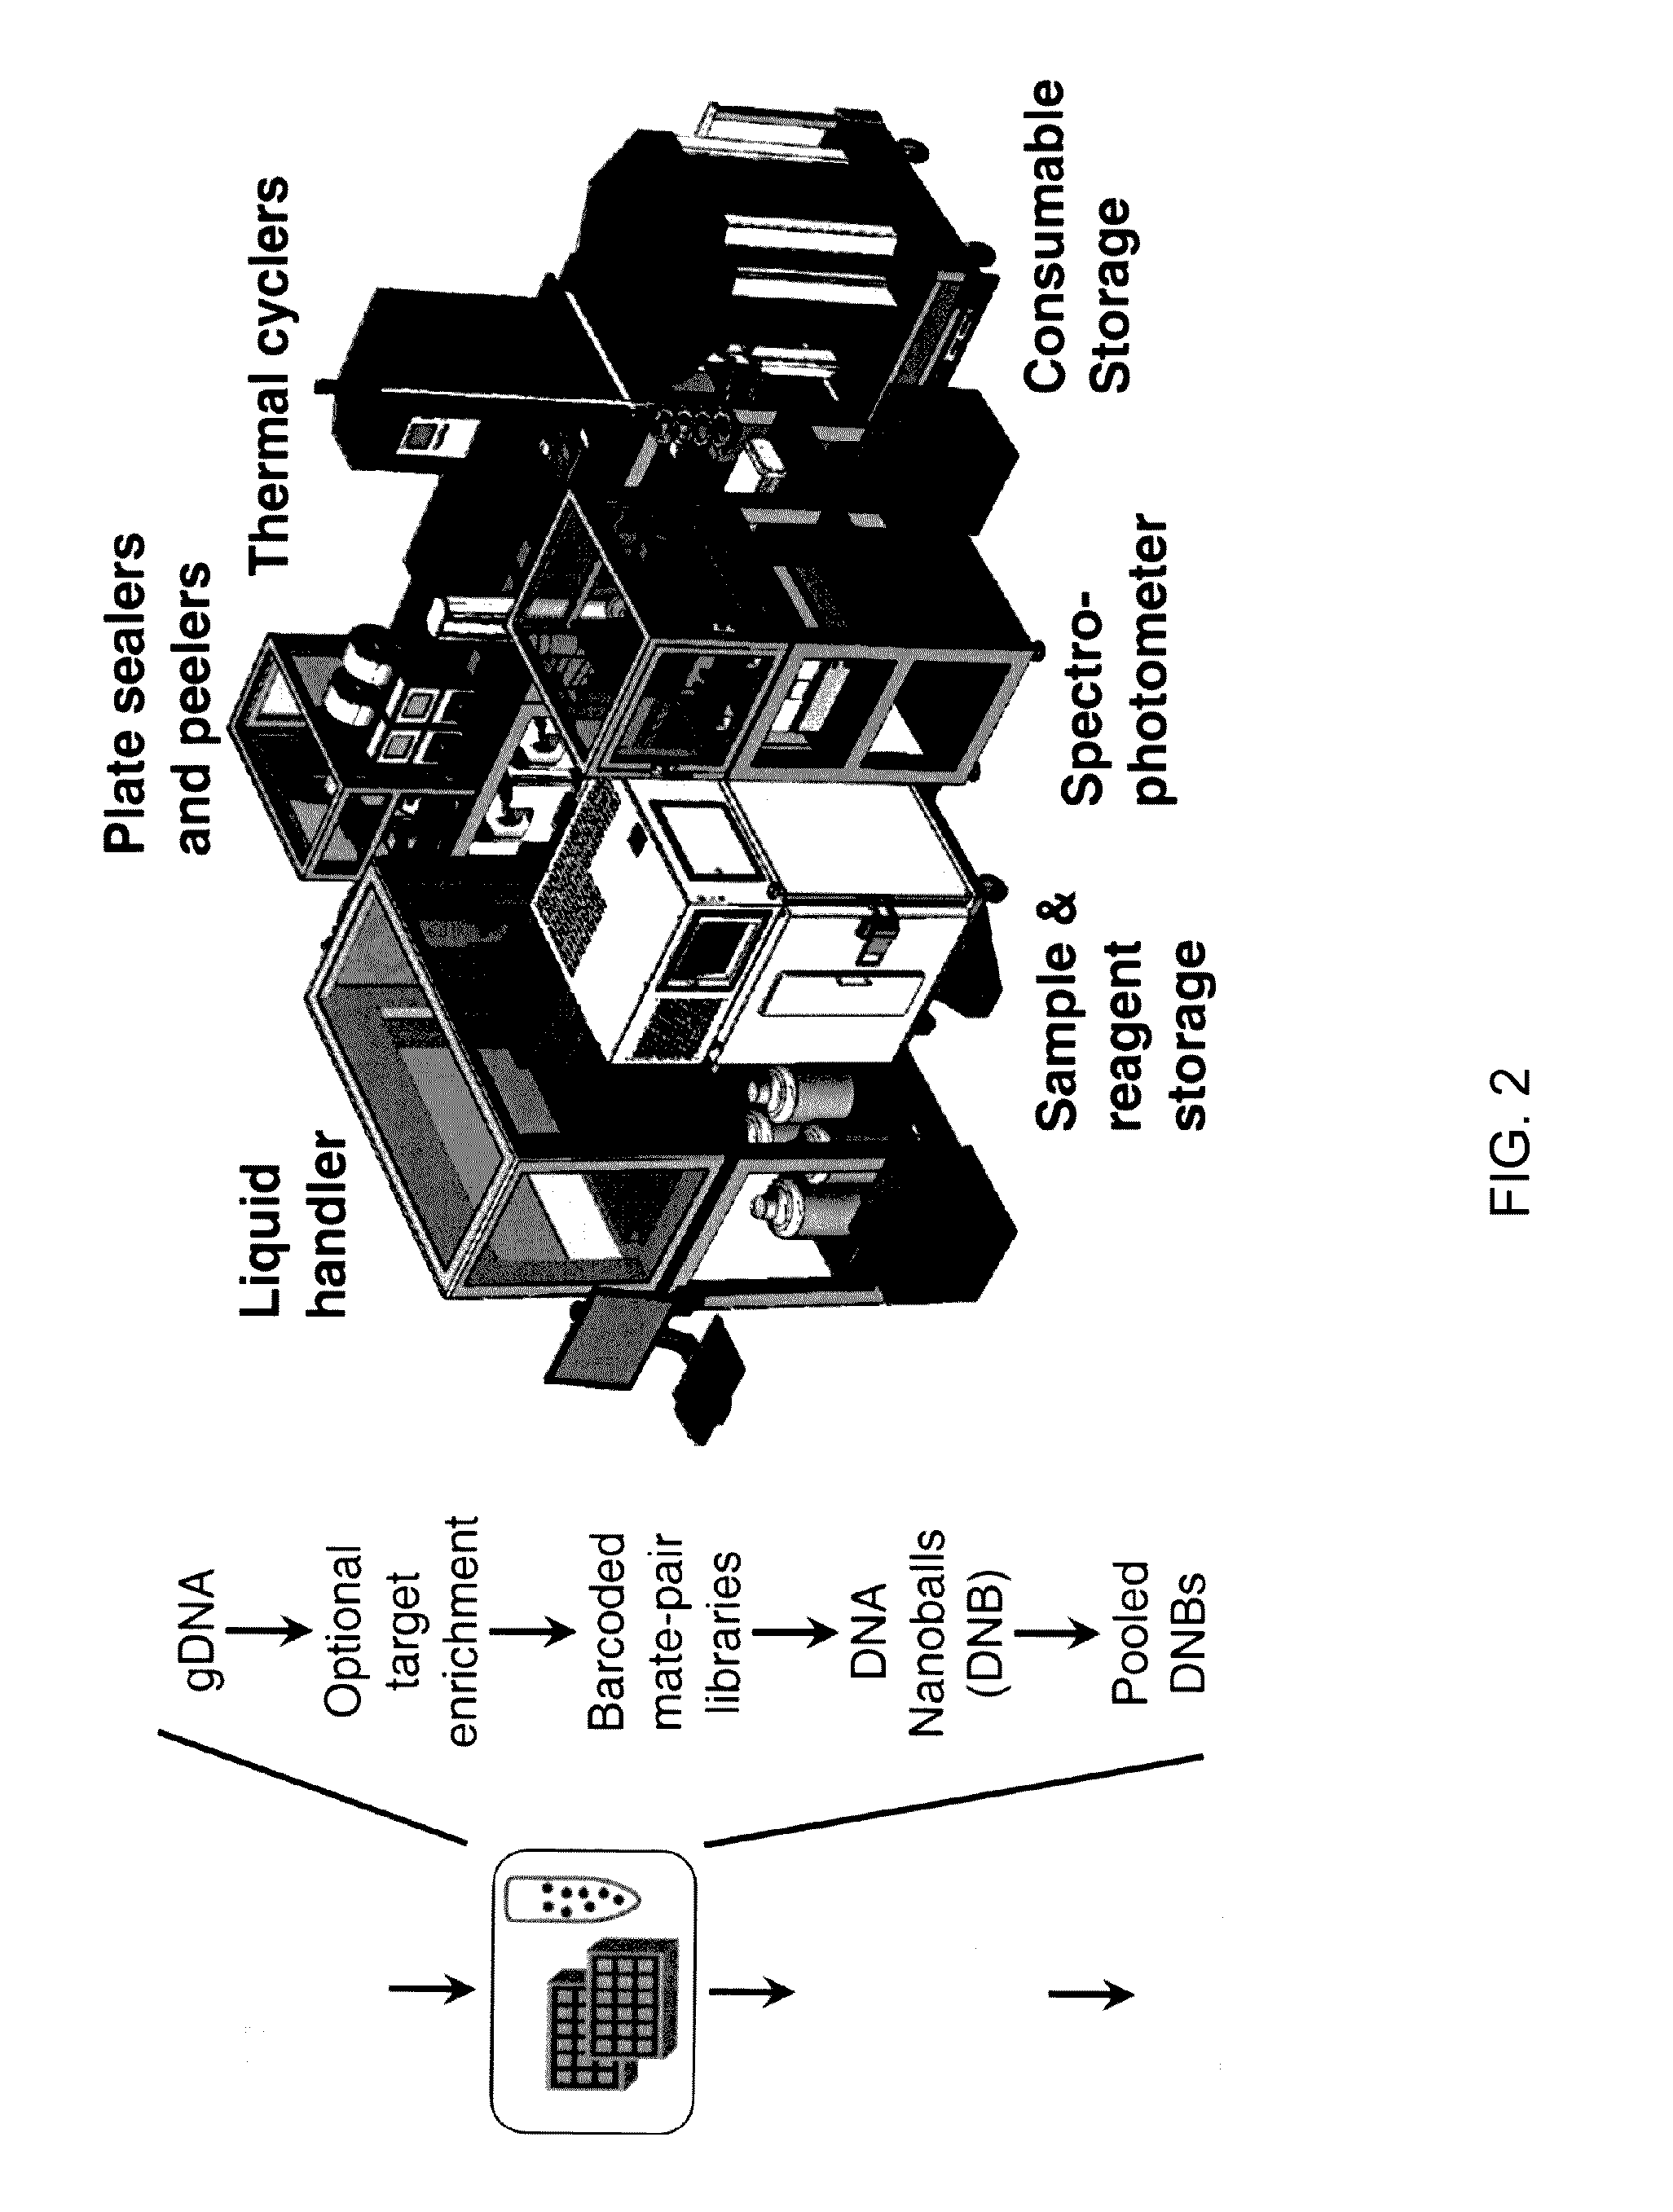 Integrated system for nucleic acid sequence and analysis